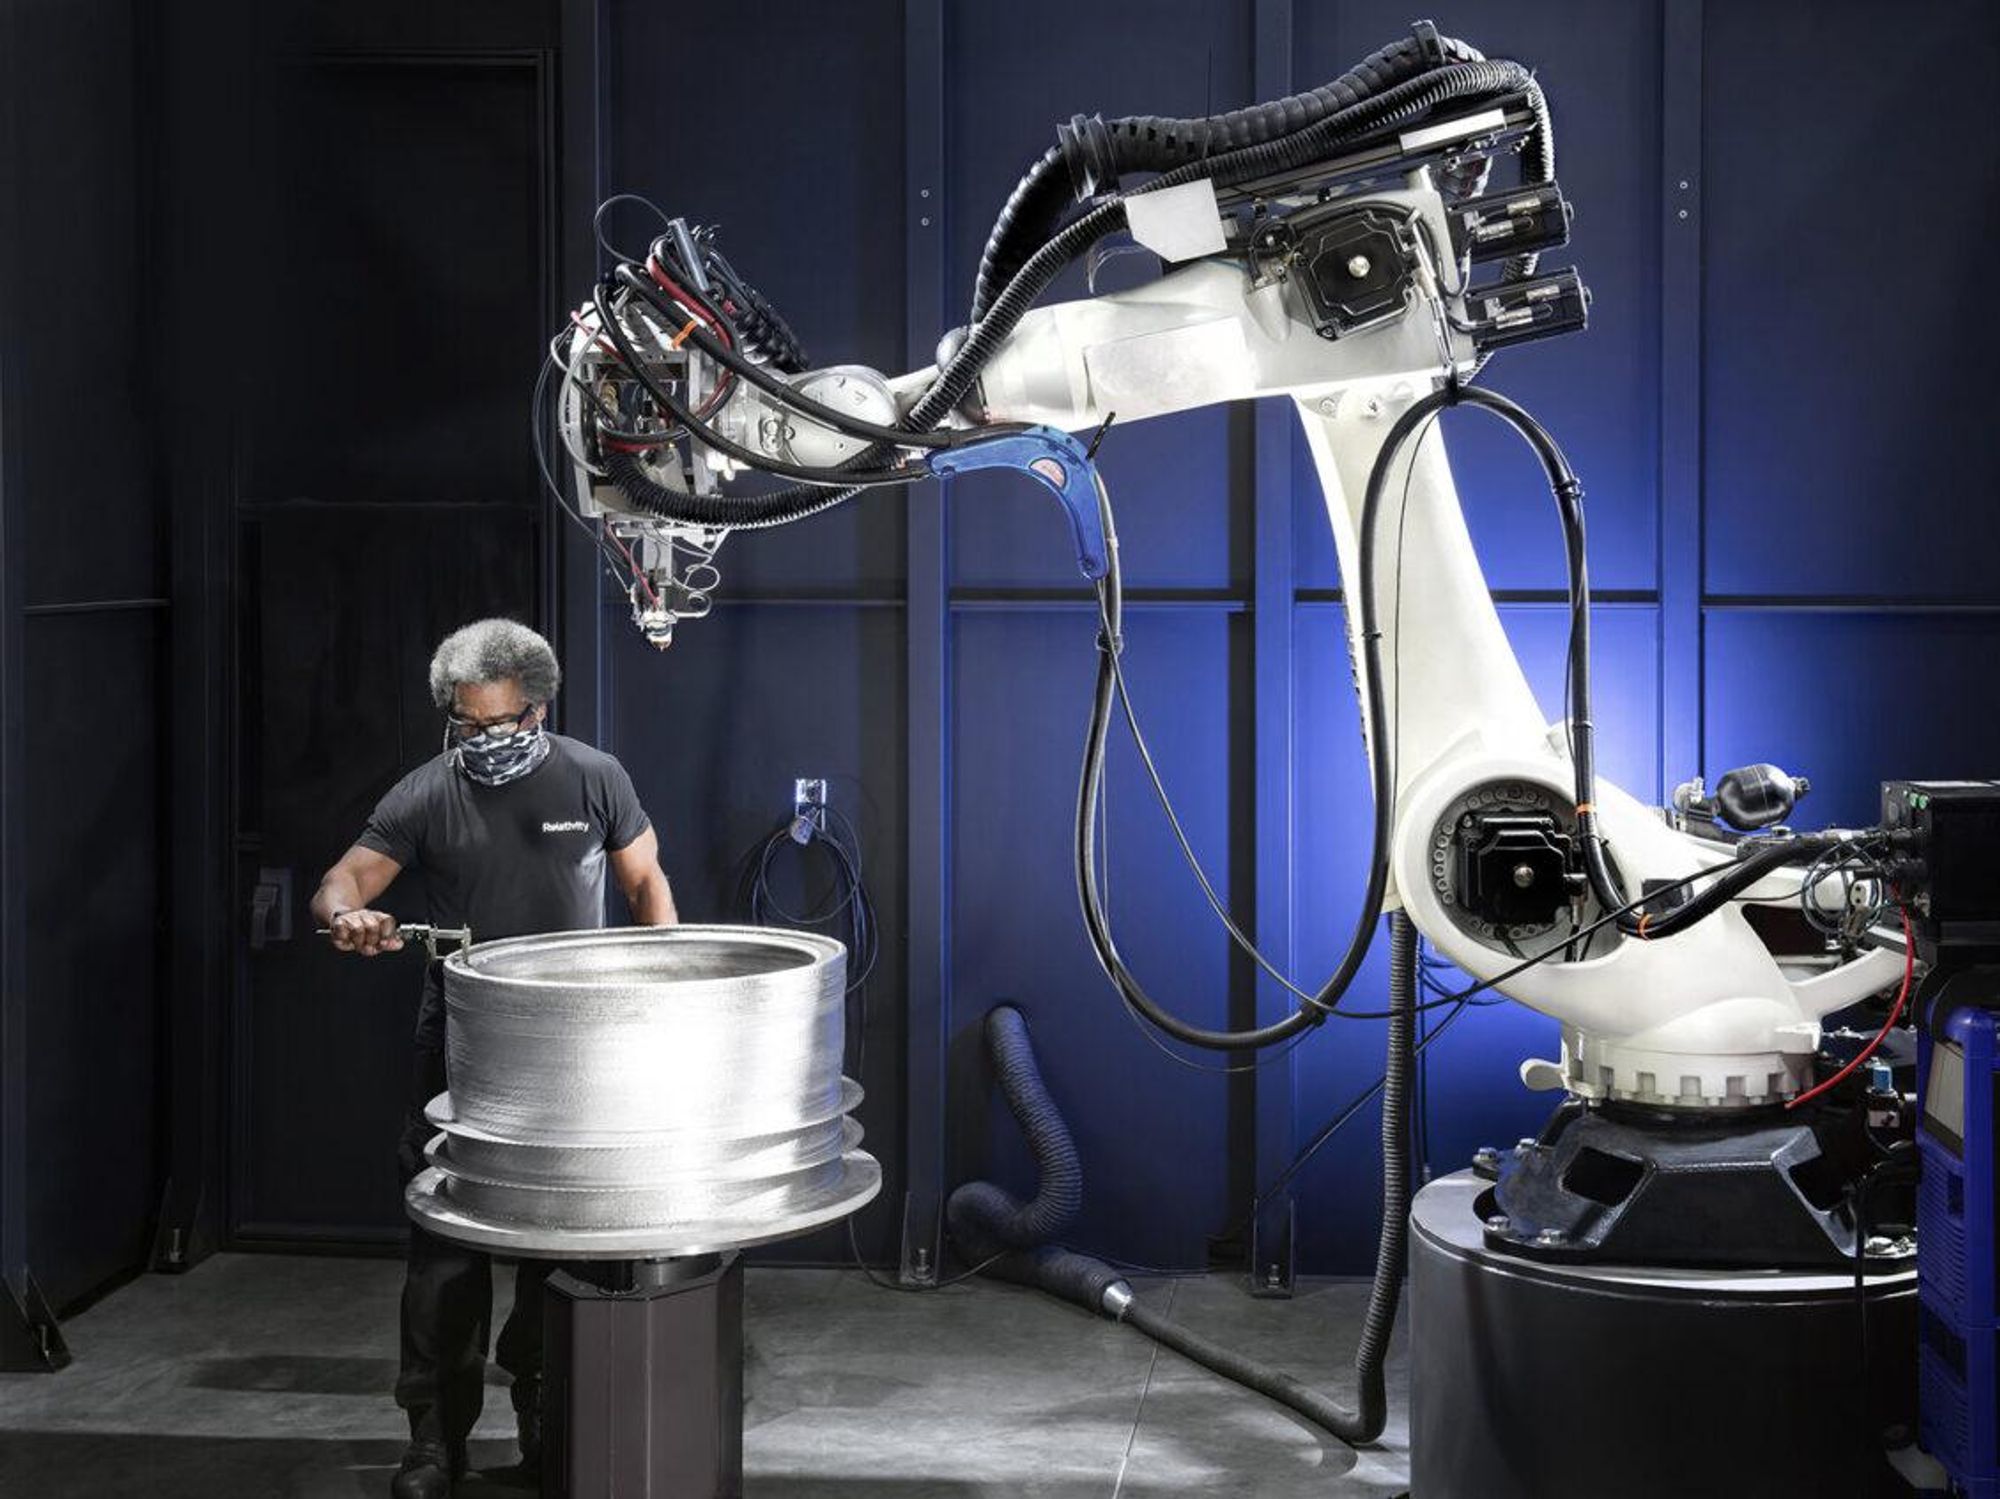 Relativity Space uses giant 3-D printers to produce components for its Terran rockets.